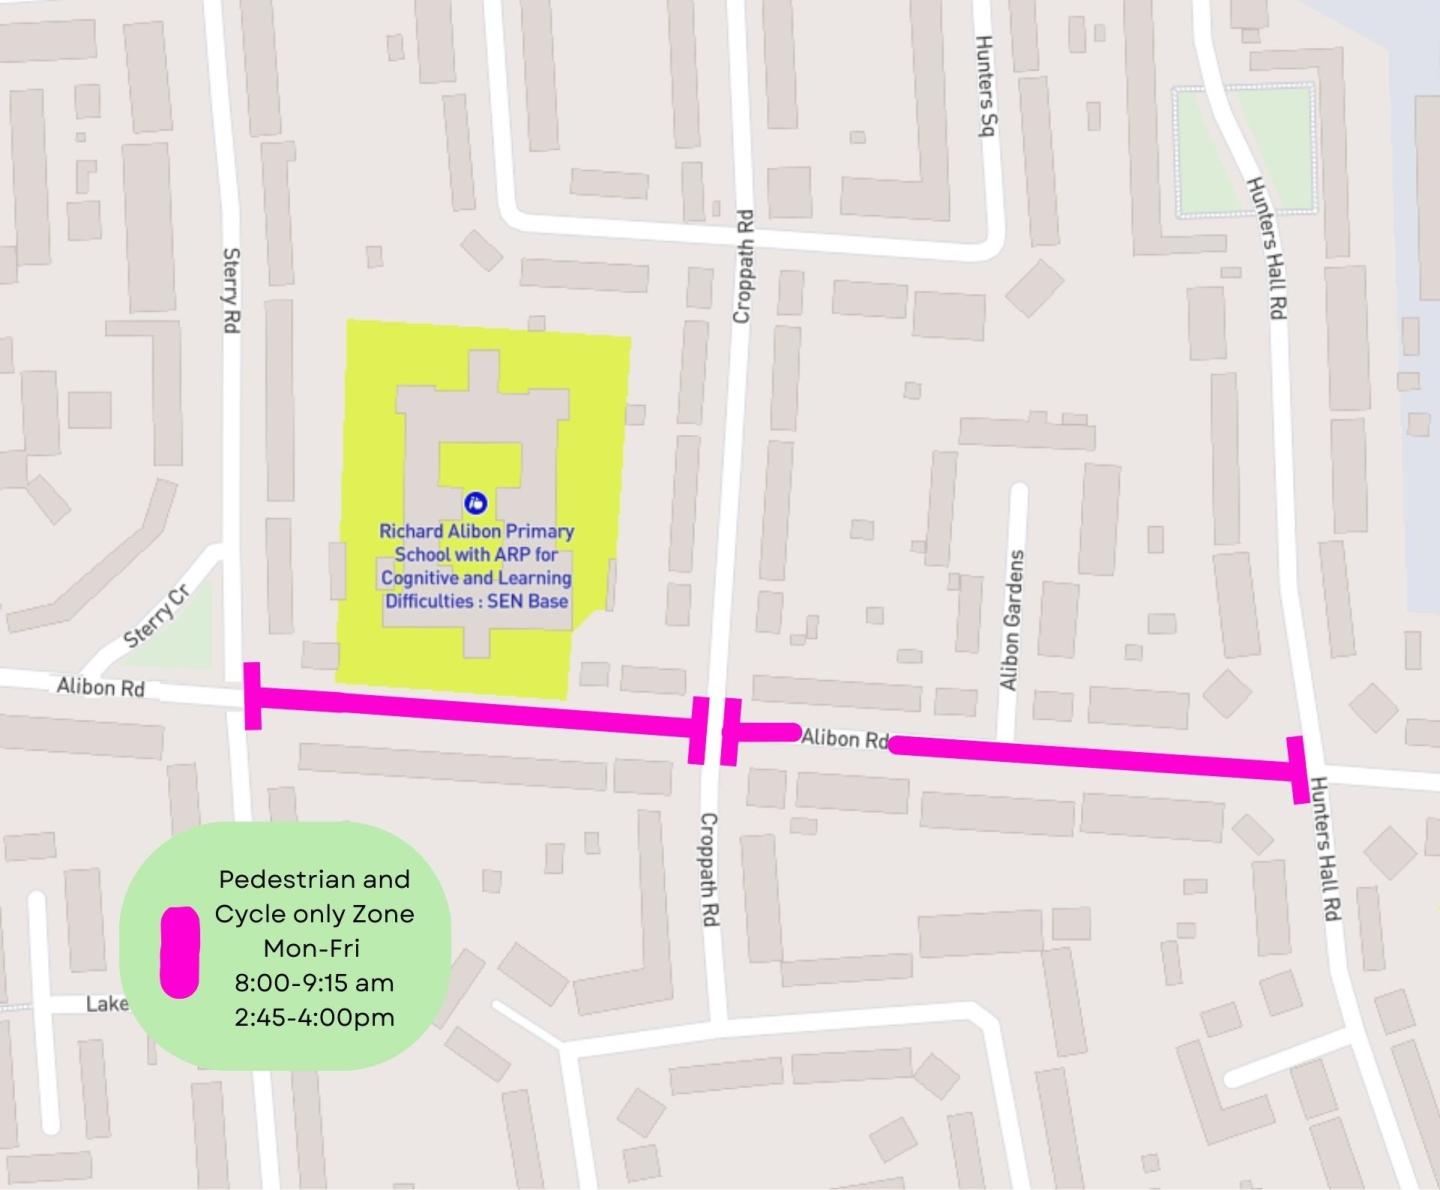 A map showing the location of the School Street for Richard Alibon Primary